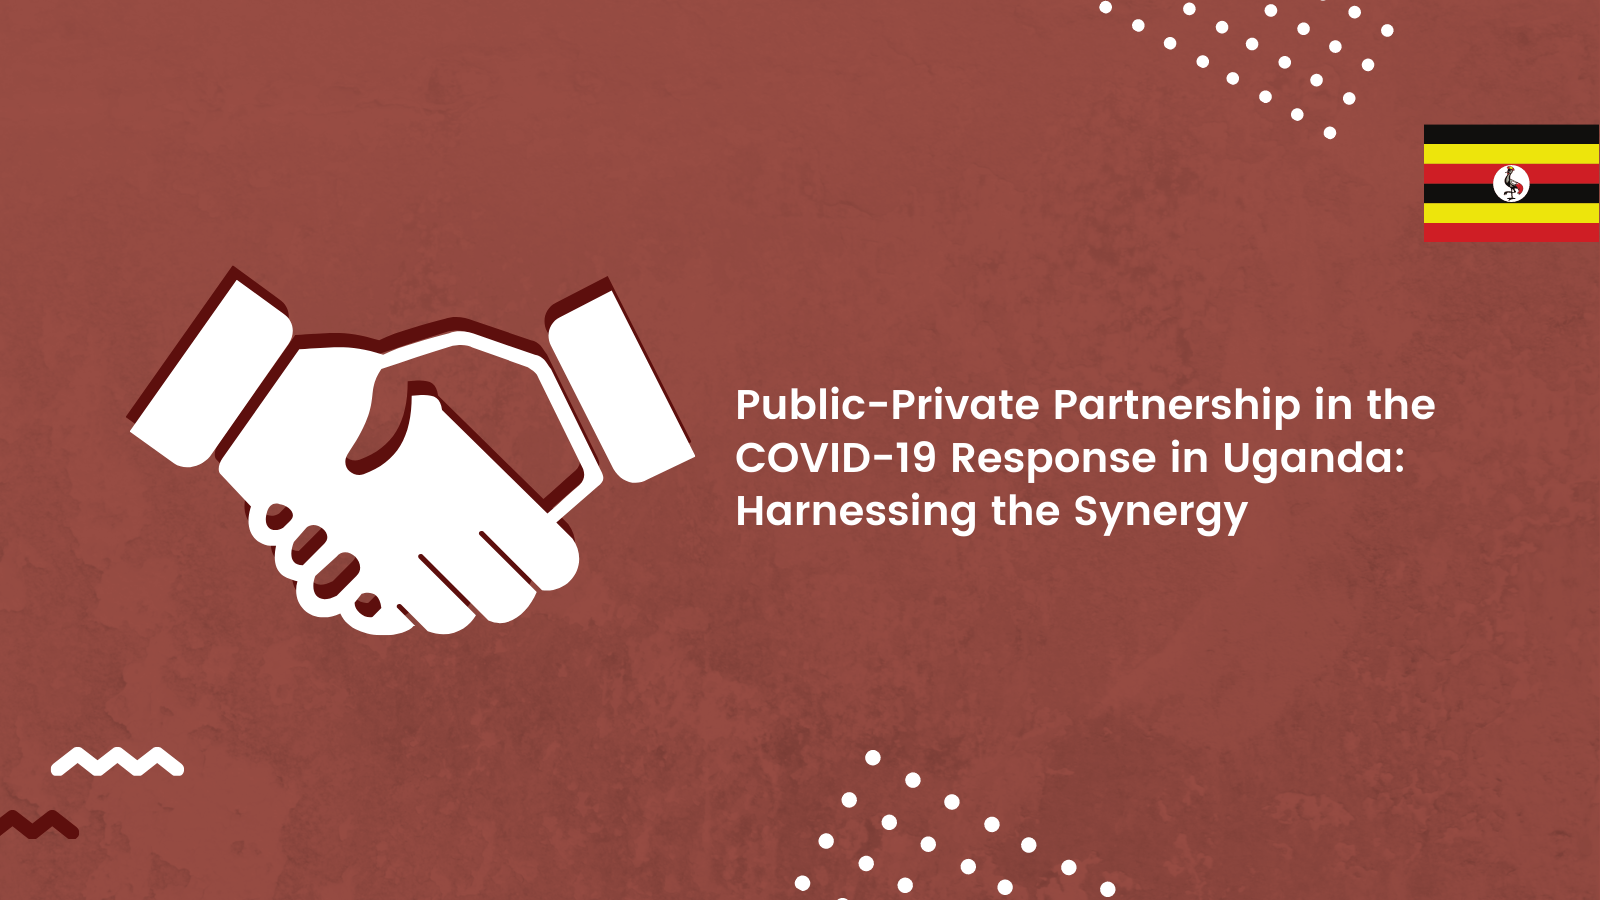 Public-Private Partnership in the COVID-19 Response in Uganda: Harnessing the Synergy